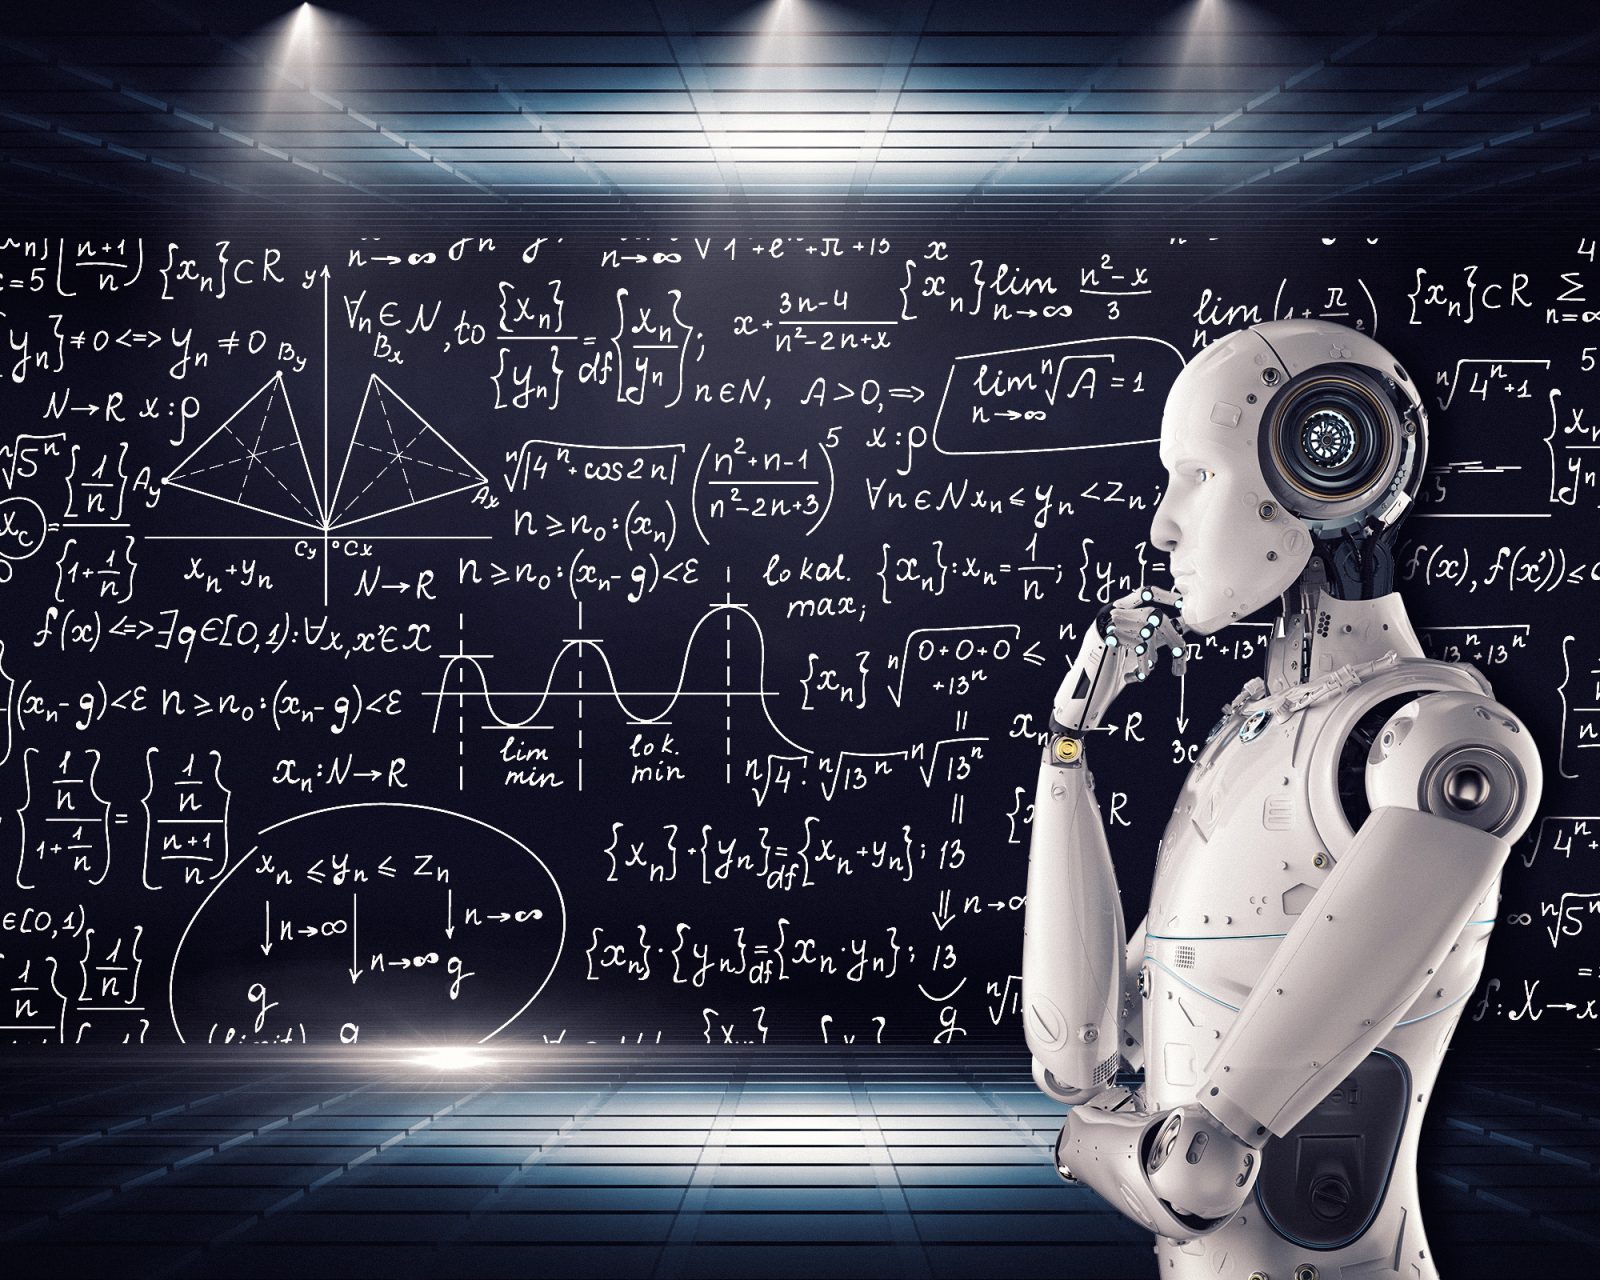 Robot looking at a chalkboard covered in mathematical equations